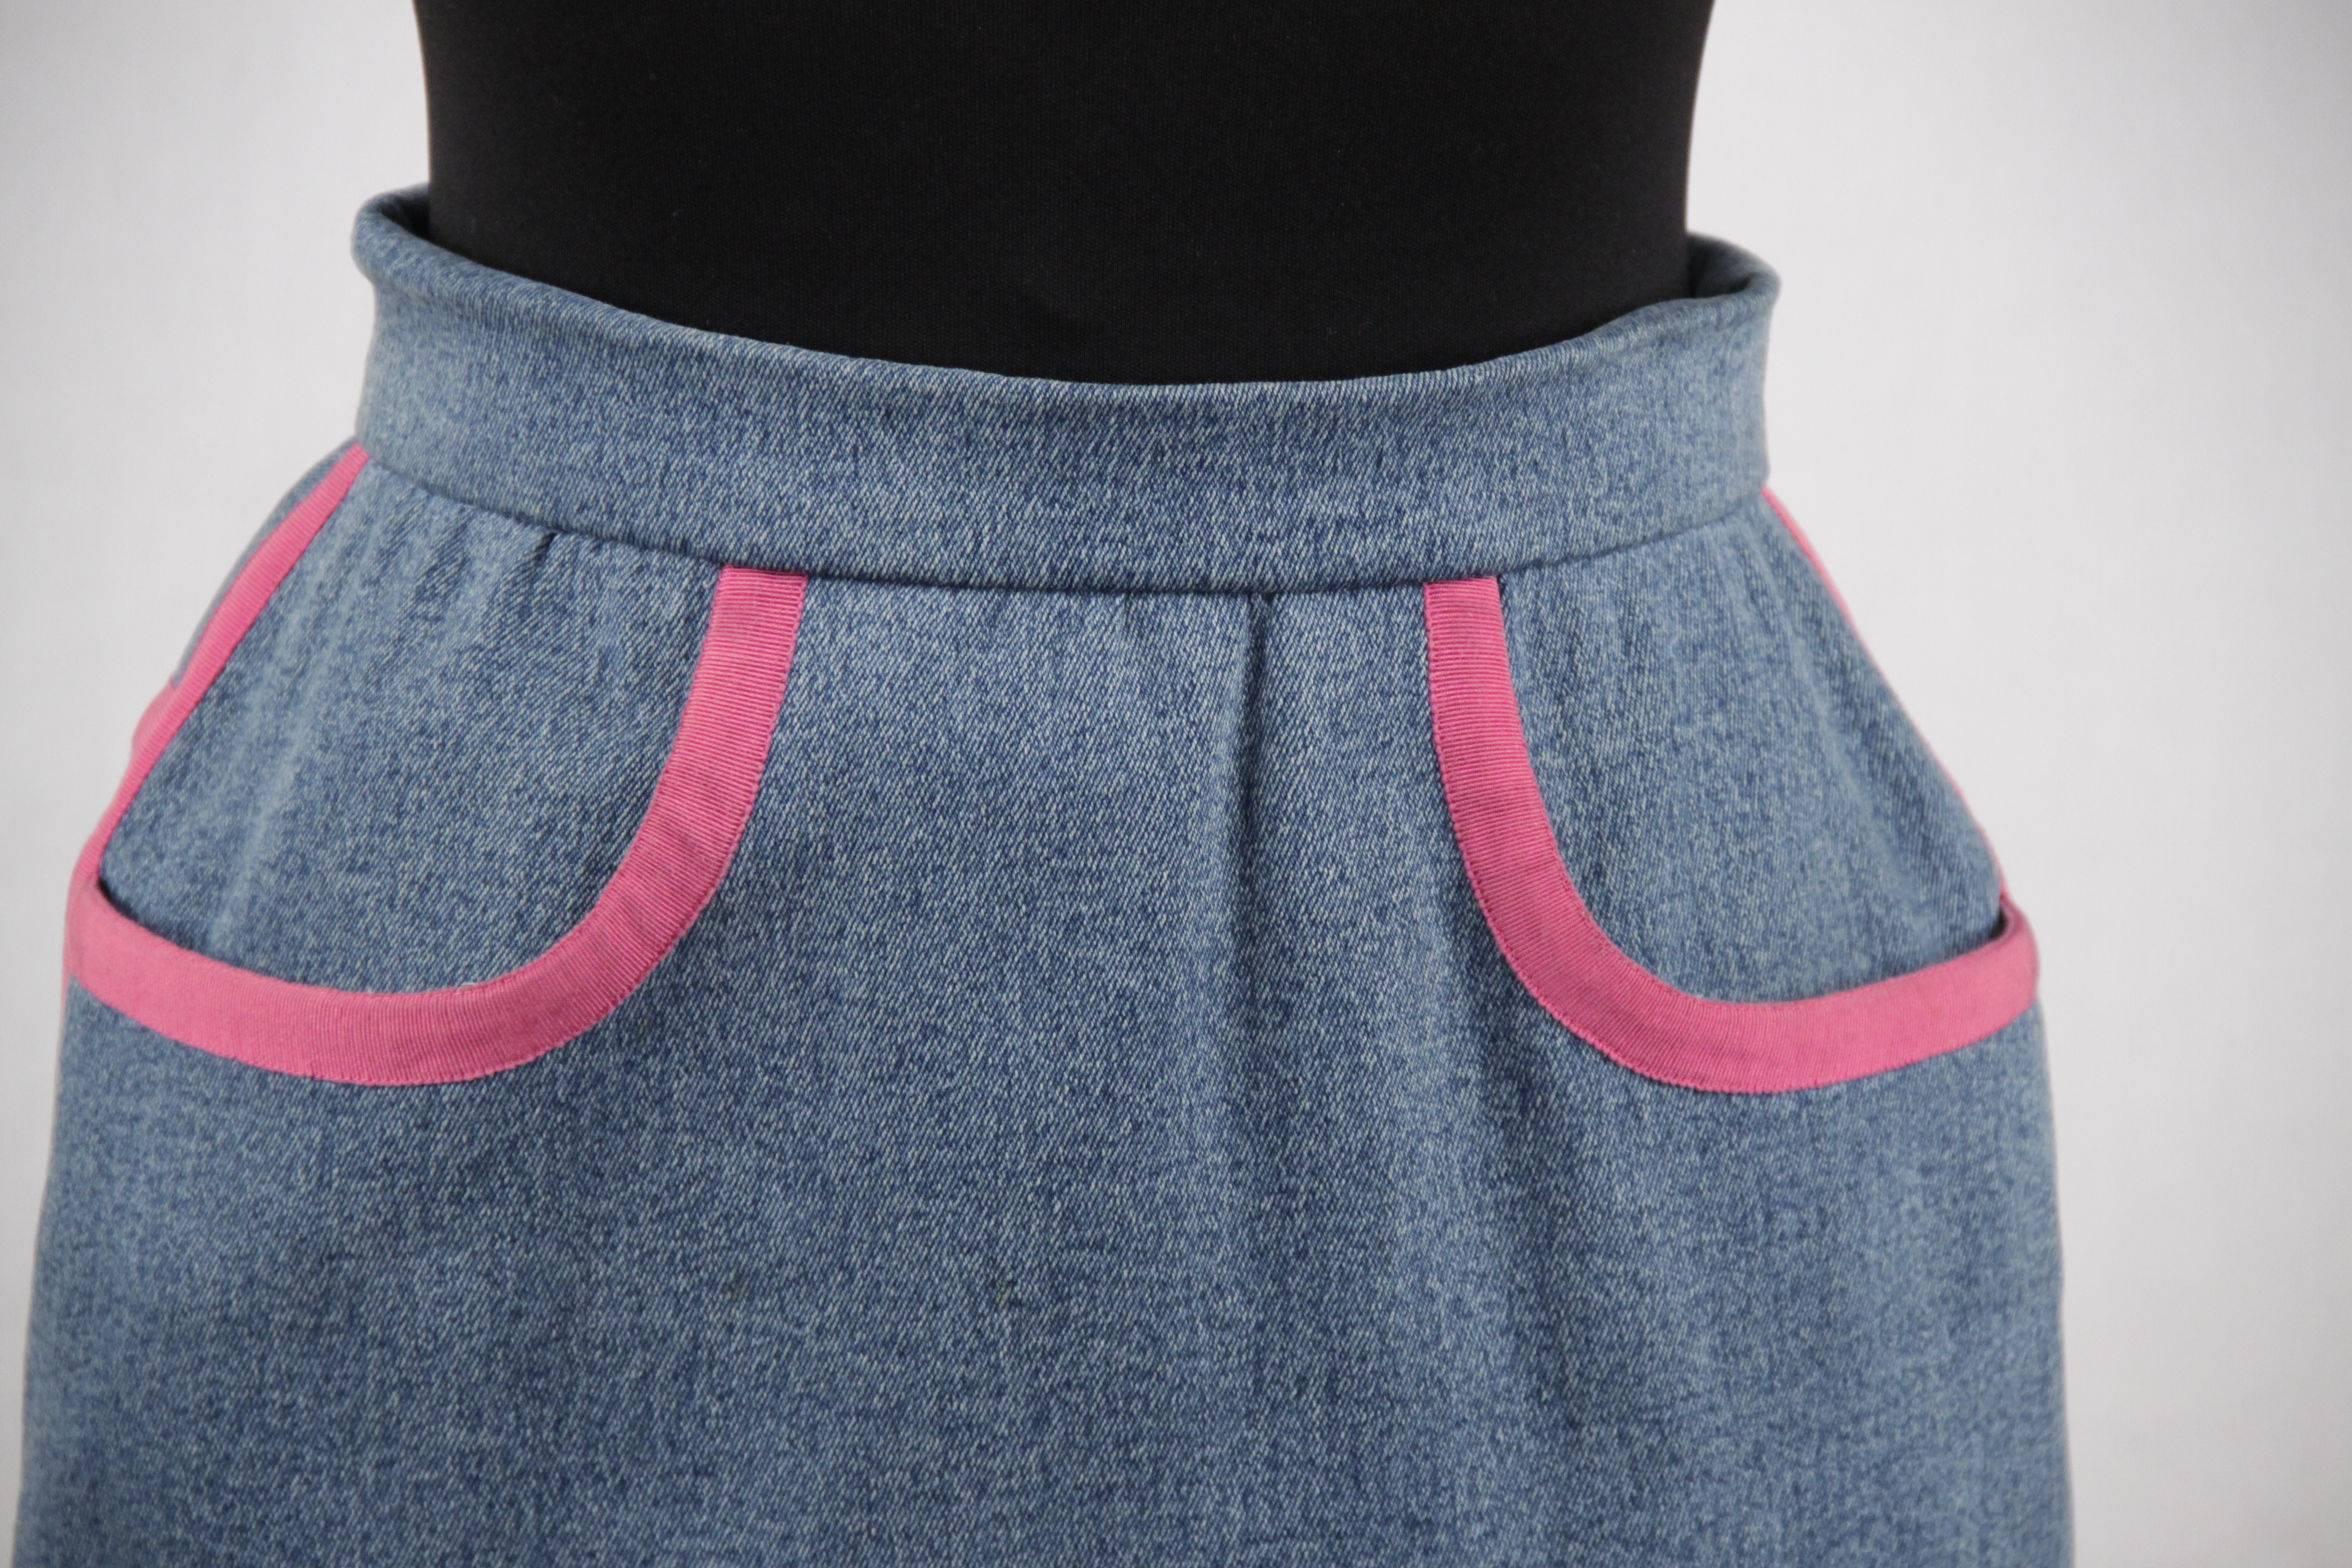  - Vintage denim pencil skirt by Chanel
- It is made of acid washed denim
- It is trimmed with bright pink grosgrain ribbon around the hem, the pockets and the back seams
- Stretch fabric
- Zip and hook closure on the back
- 2 pockets on the